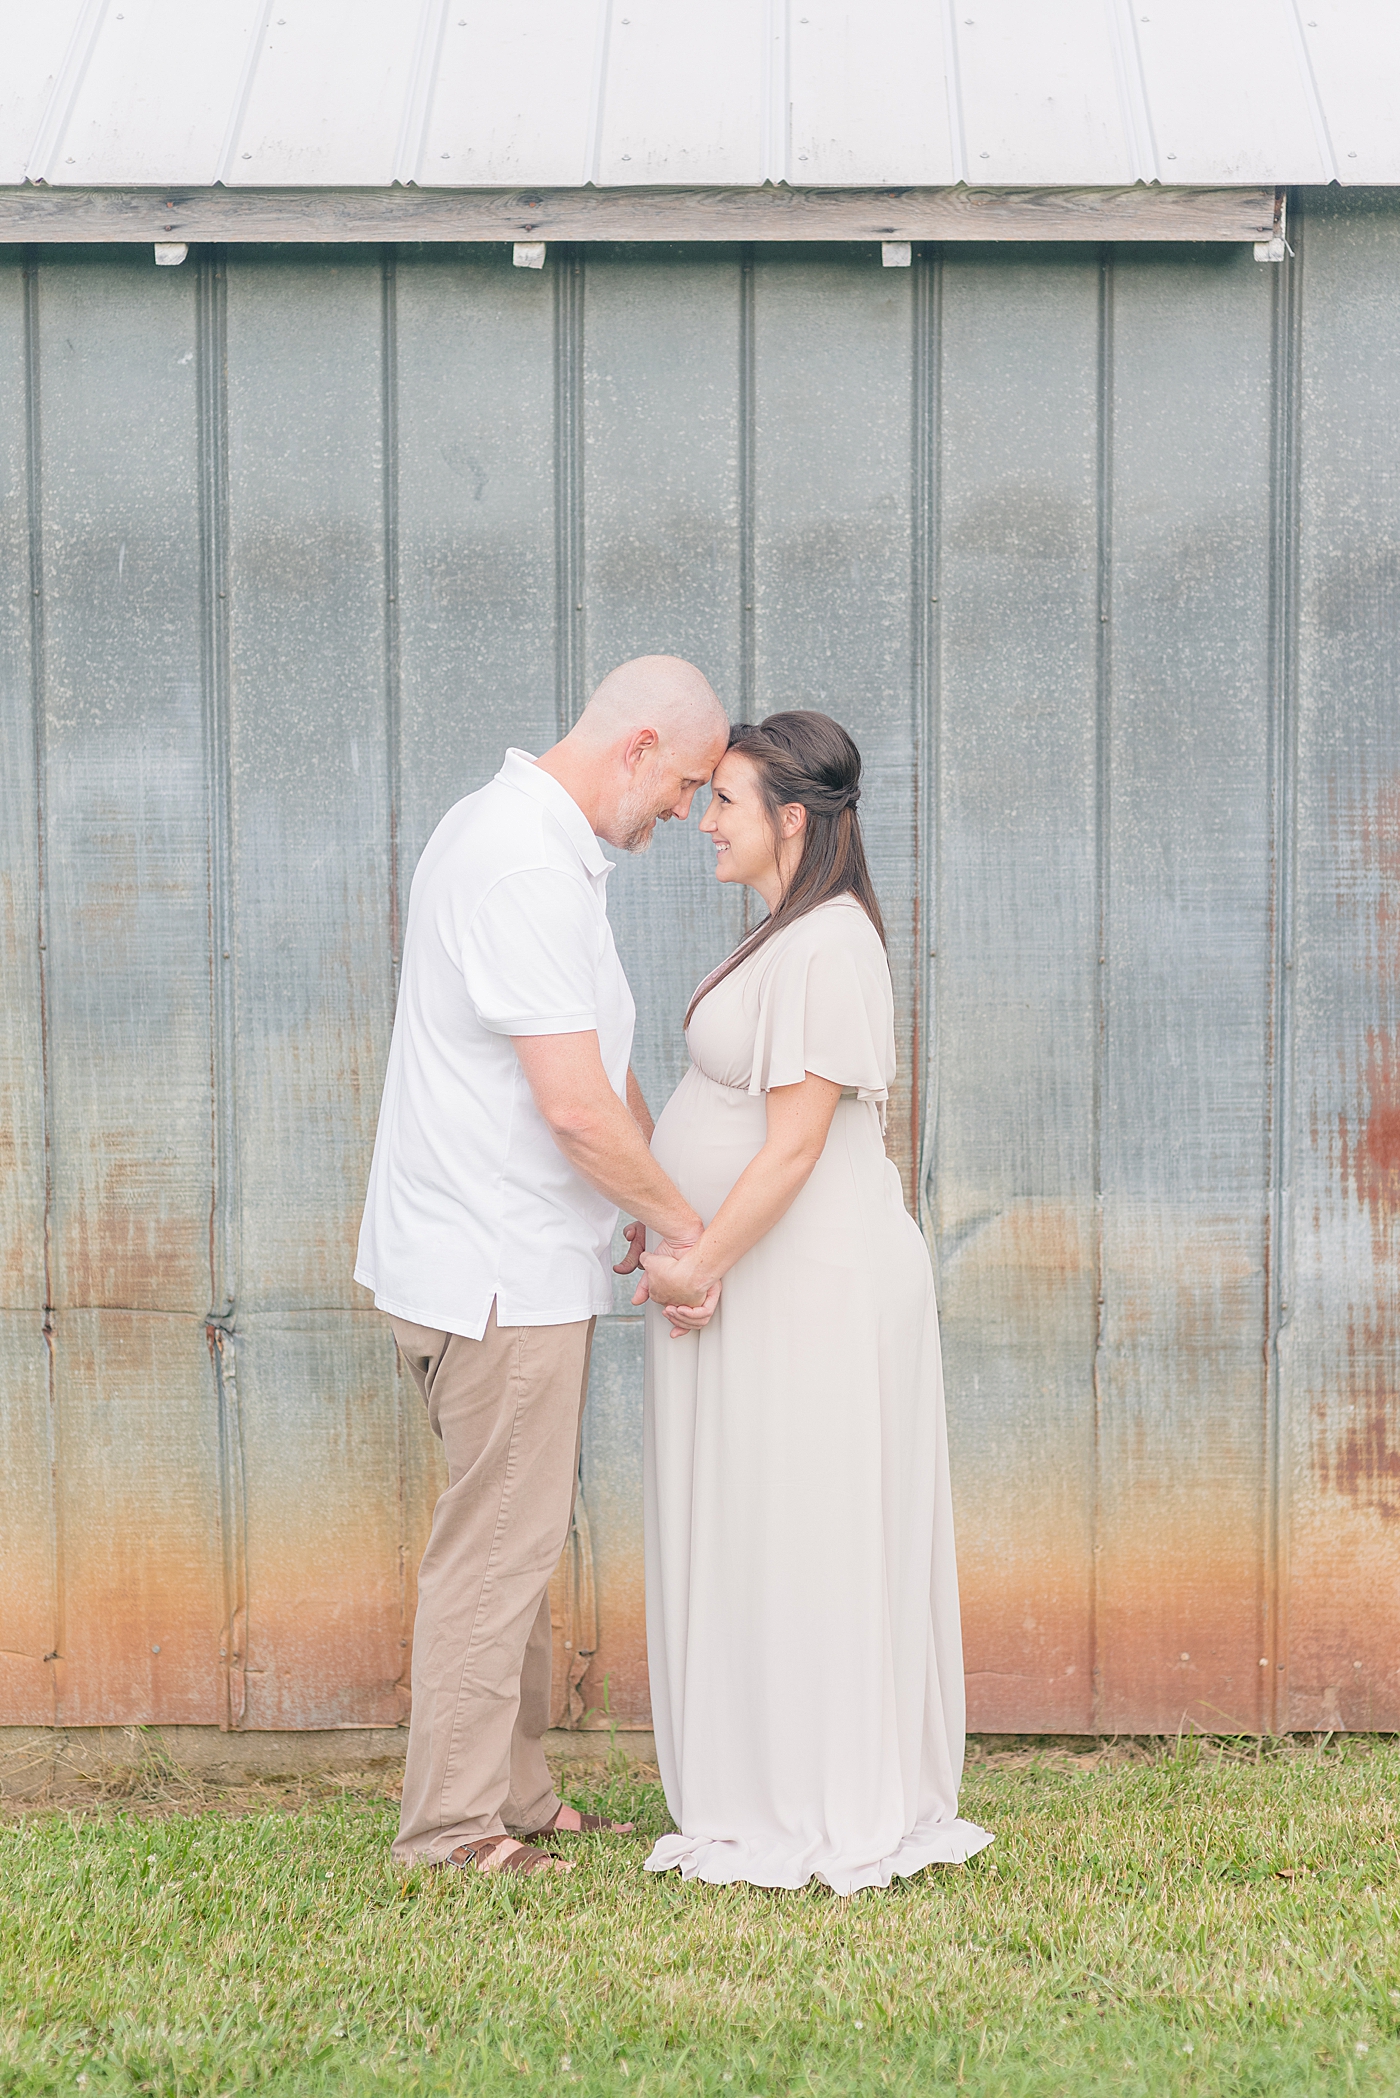 Mom and dad to be holding hands with foreheads together | Photo by Anna Wisjo Photography